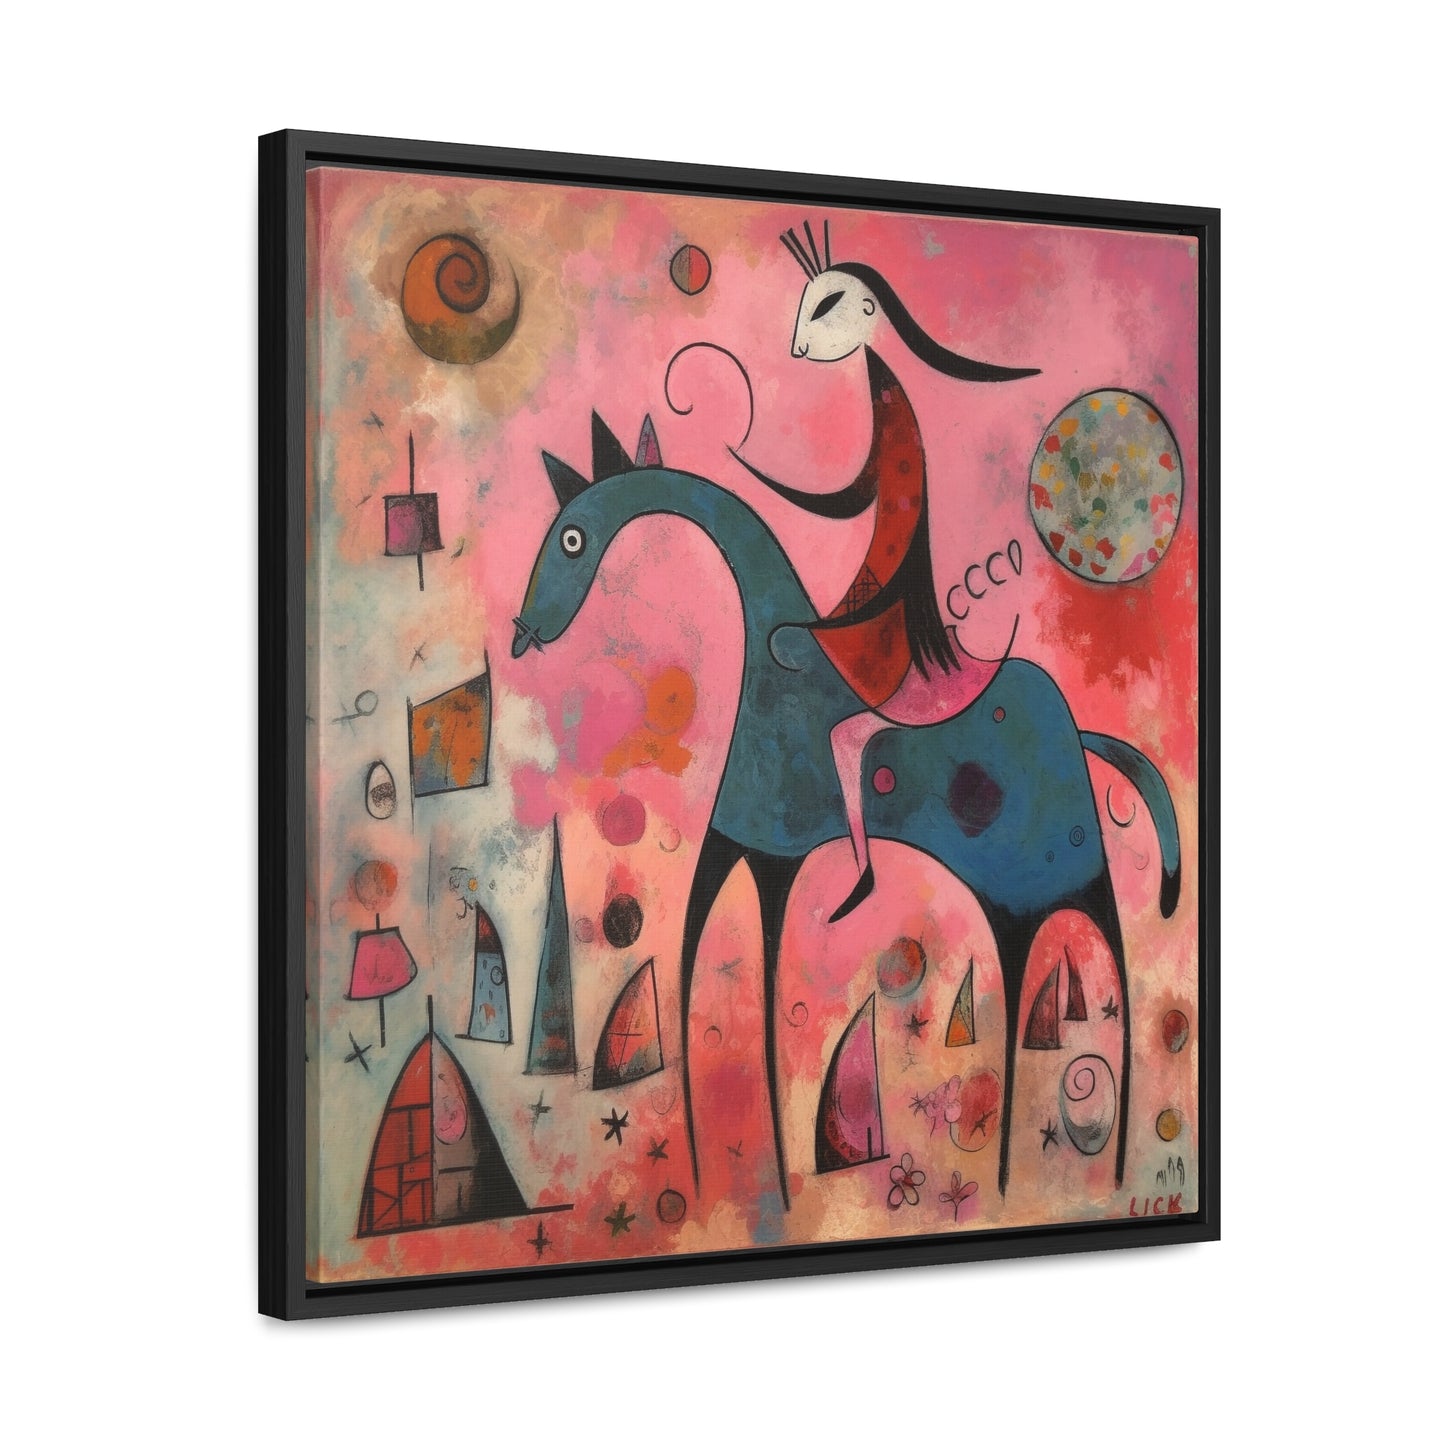 The Dreams of the Child 47, Gallery Canvas Wraps, Square Frame